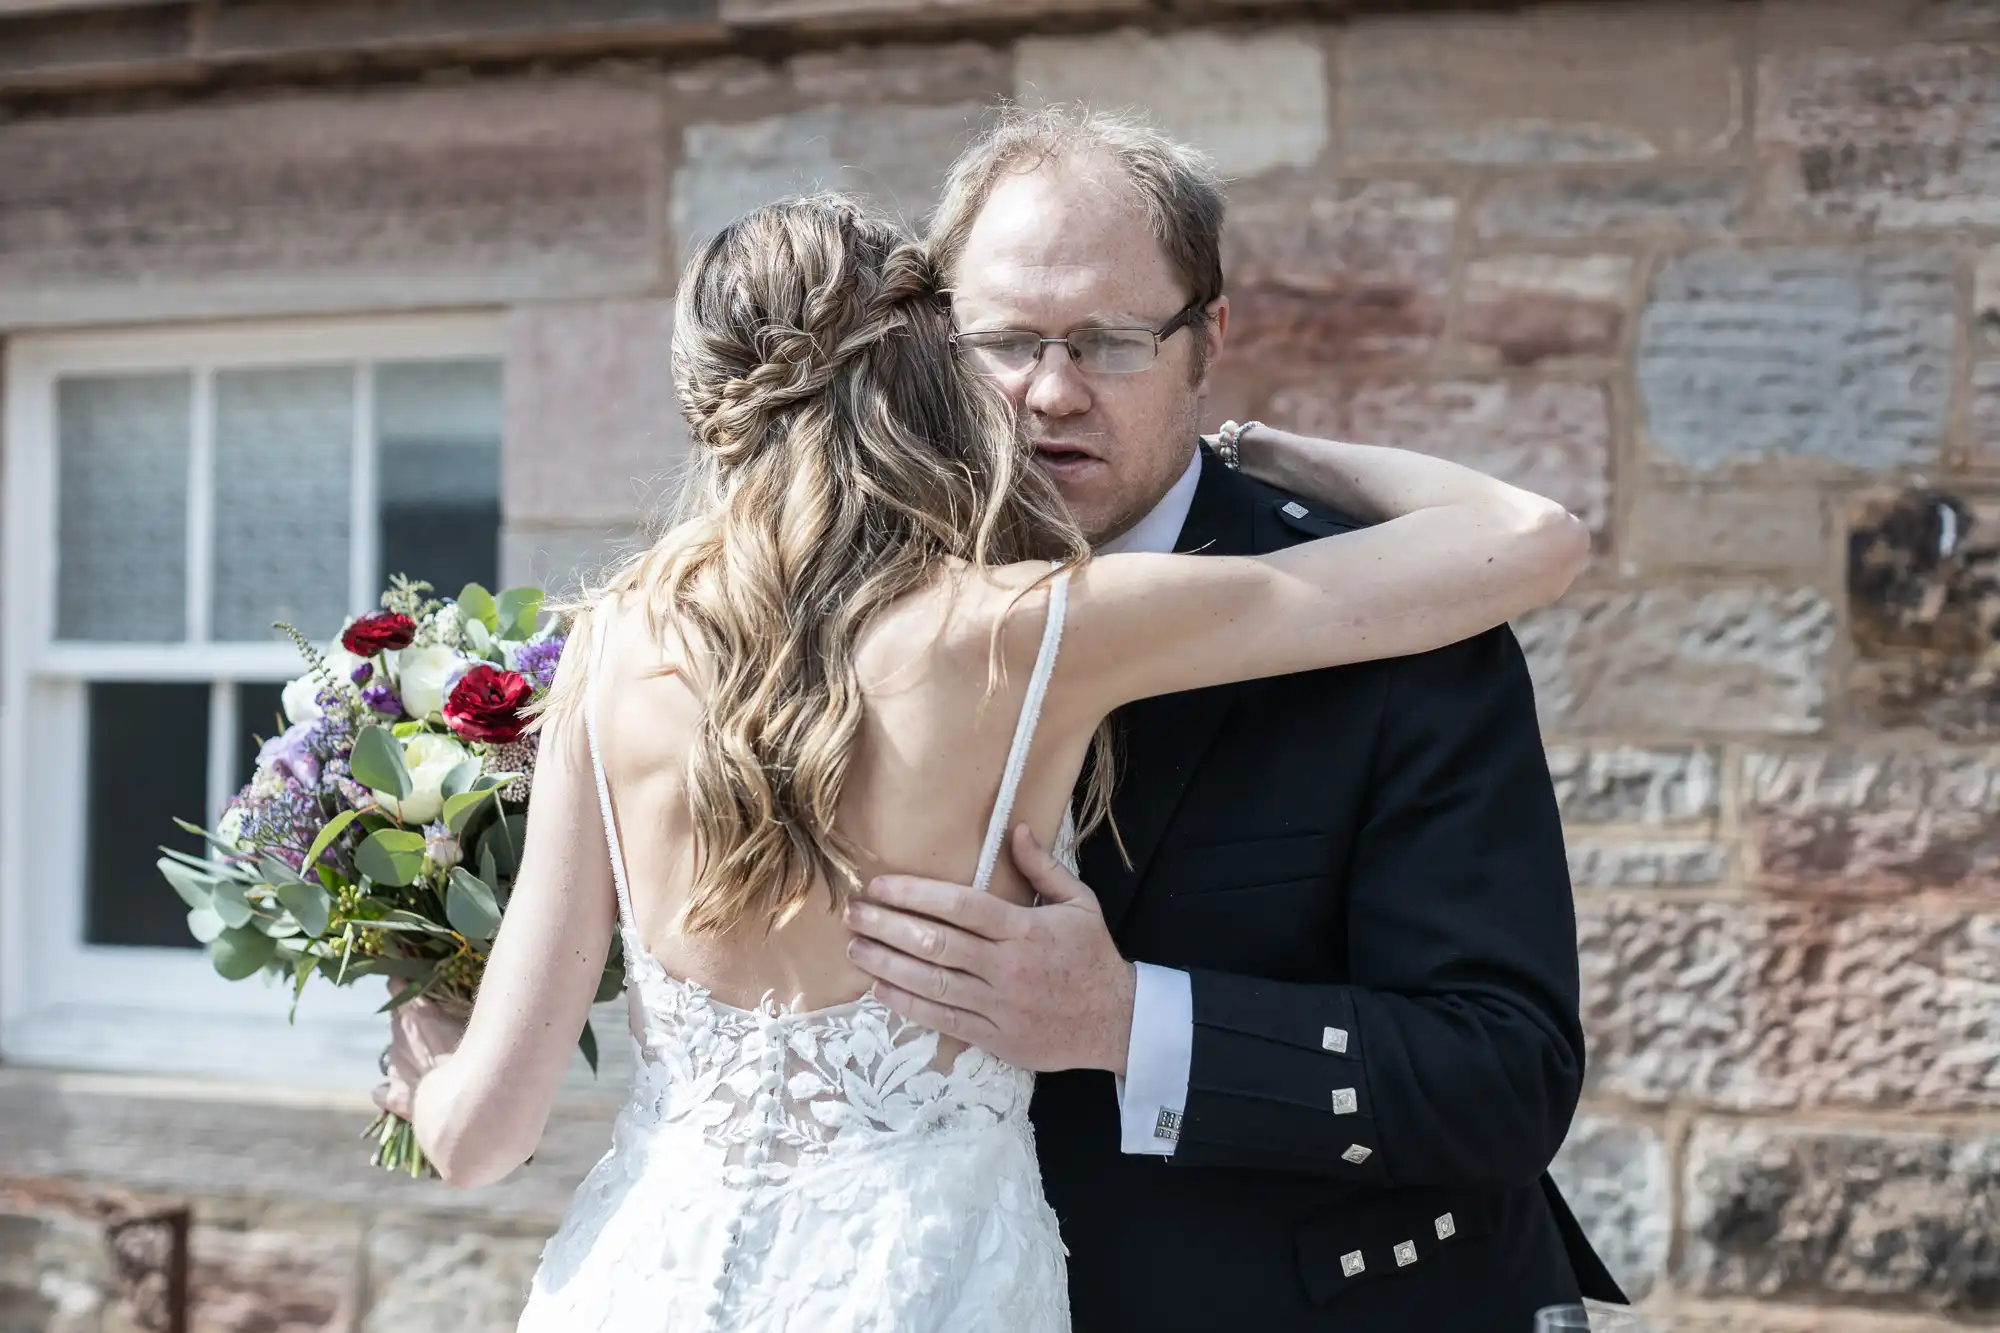 A bride in a white lace dress hugs a man in a formal black suit while holding a bouquet of flowers. They are outside in front of a brick building.